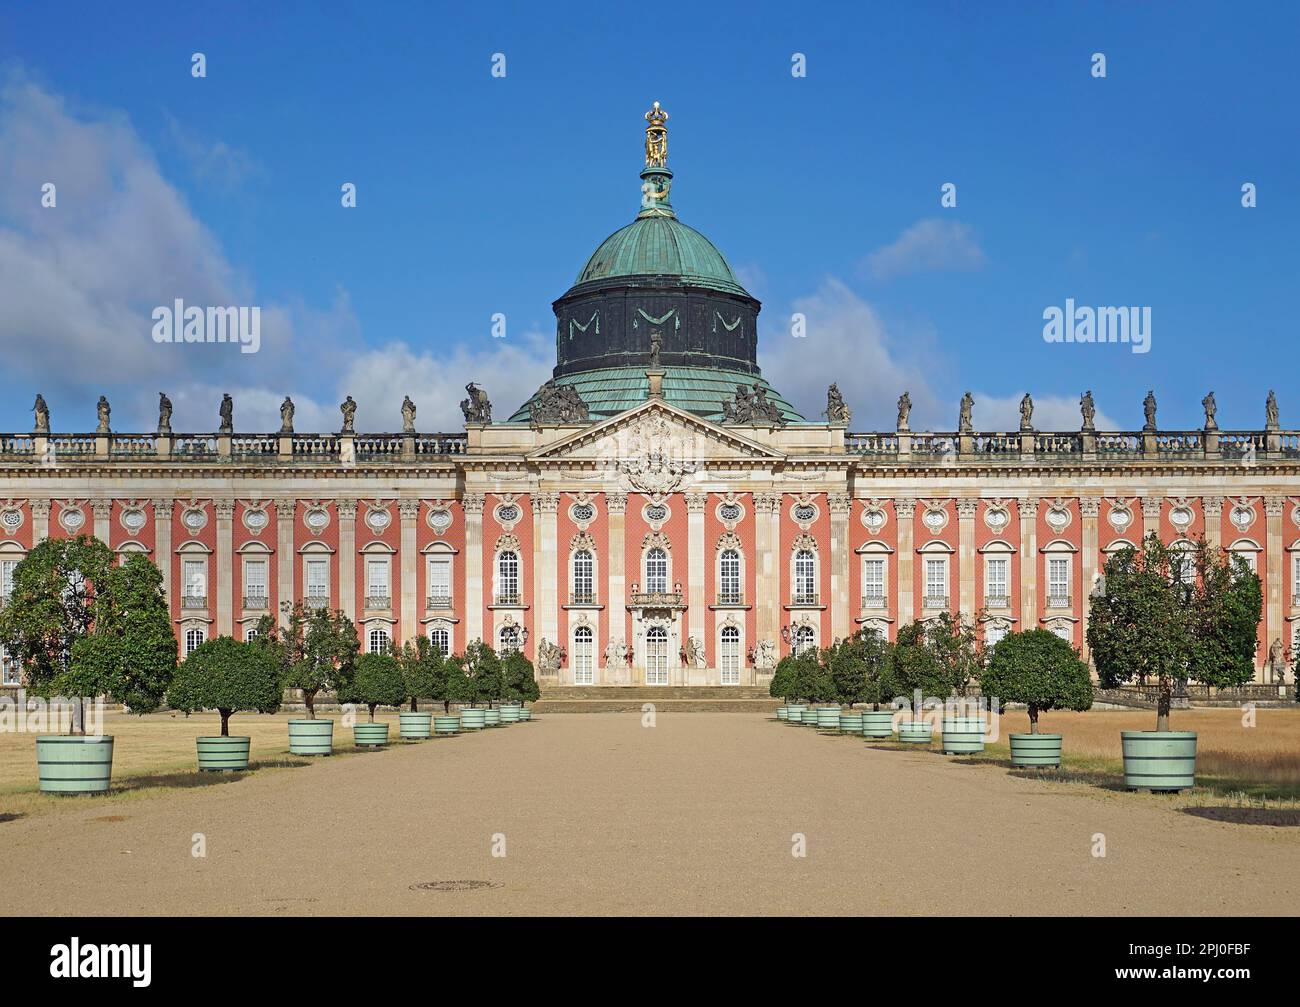 The New Palace, building of the Prussian Baroque, especially the Frederician Rococo, Sanssouci Park, Potsdam, Brandenburg, Germany Stock Photo